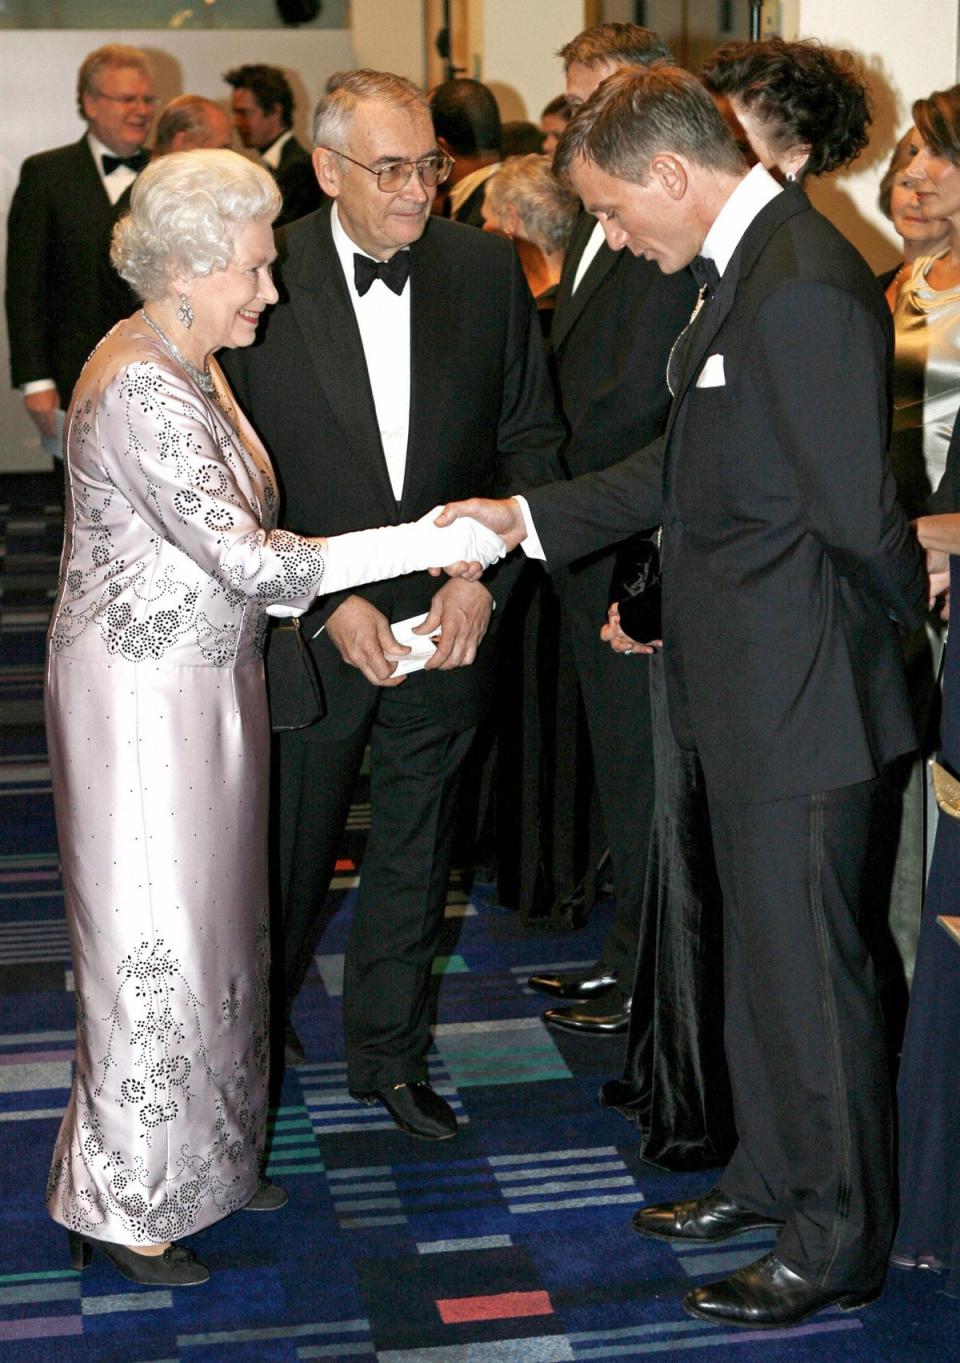 Daniel Craig: Daniel Craig looks downwards as he is presented to the Queen at the world premiere of James Bond film <i>Casino Royale</i> on 14 November 2006. Craig went on to film a James Bond-themed skit with the monarch for the opening ceremony of the London 2012 Olympics (AFP via Getty Images)